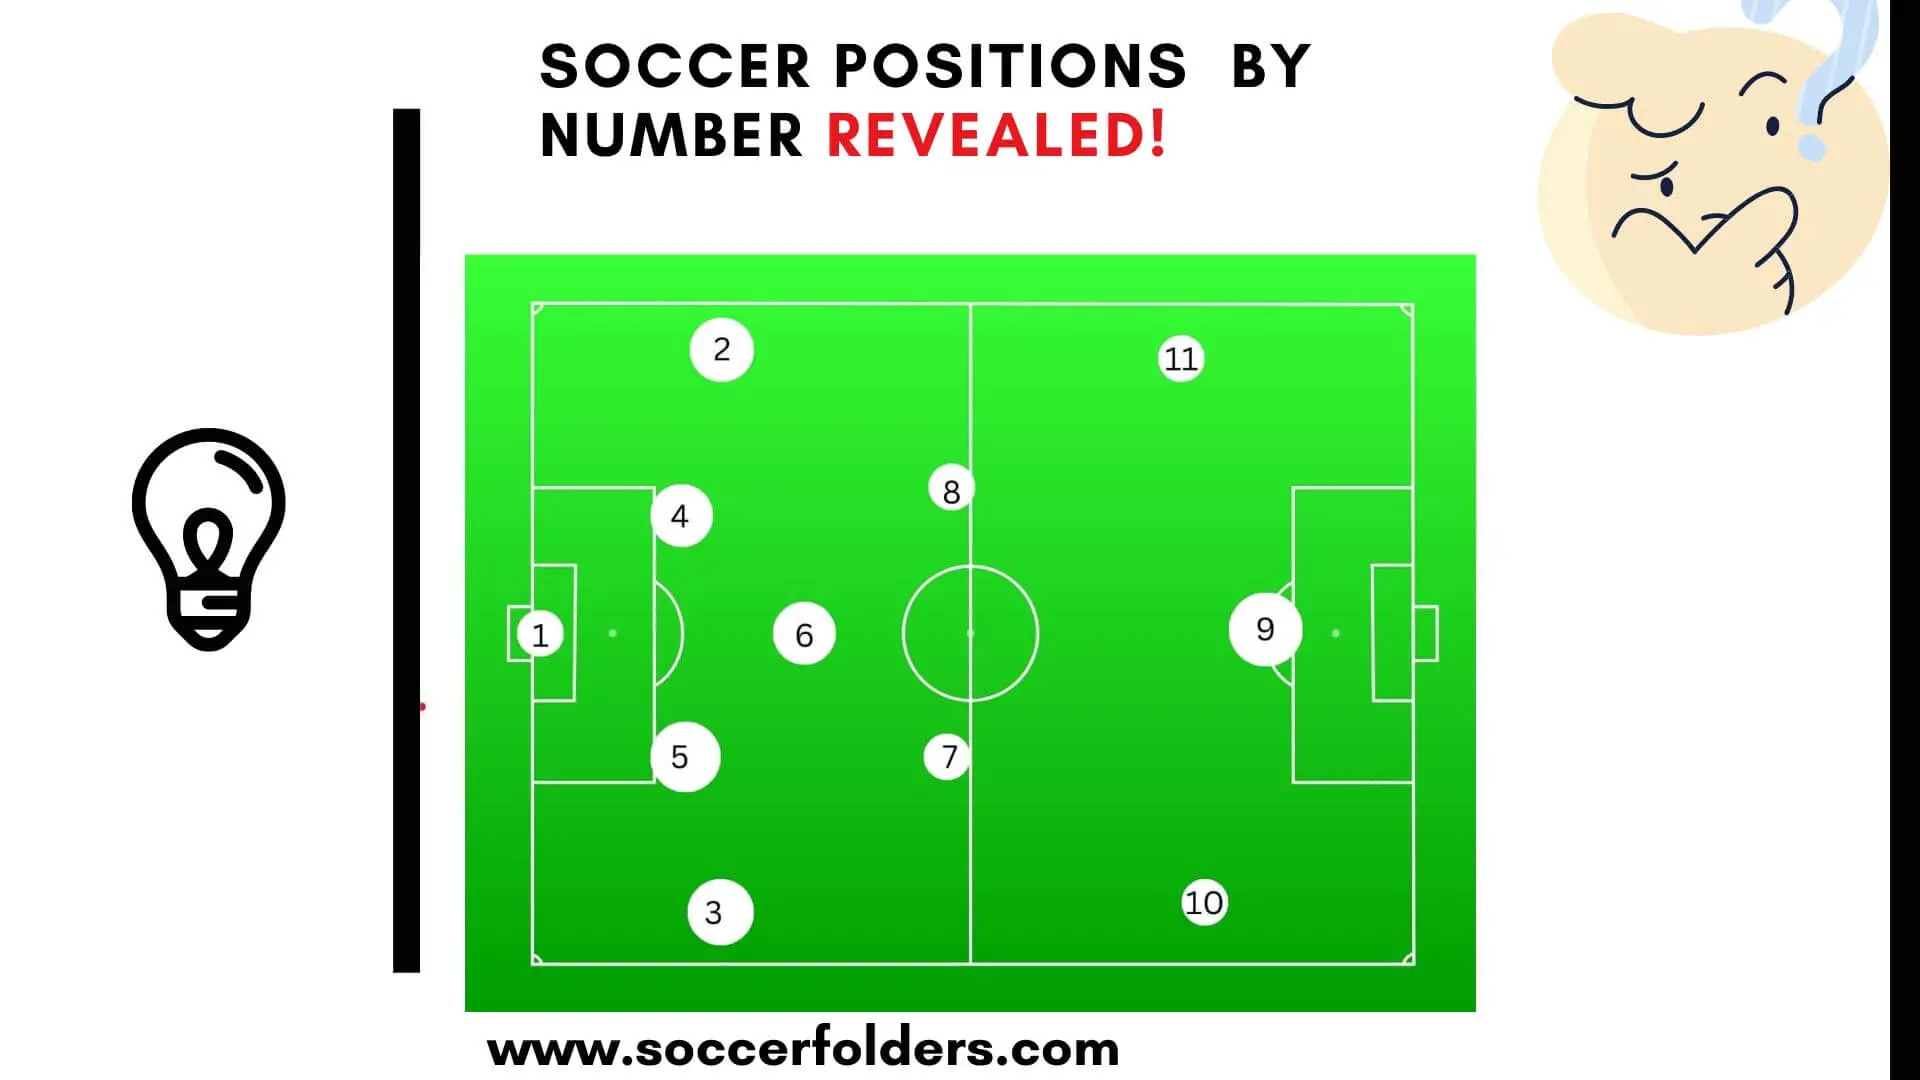 Soccer positions by number - Featured image